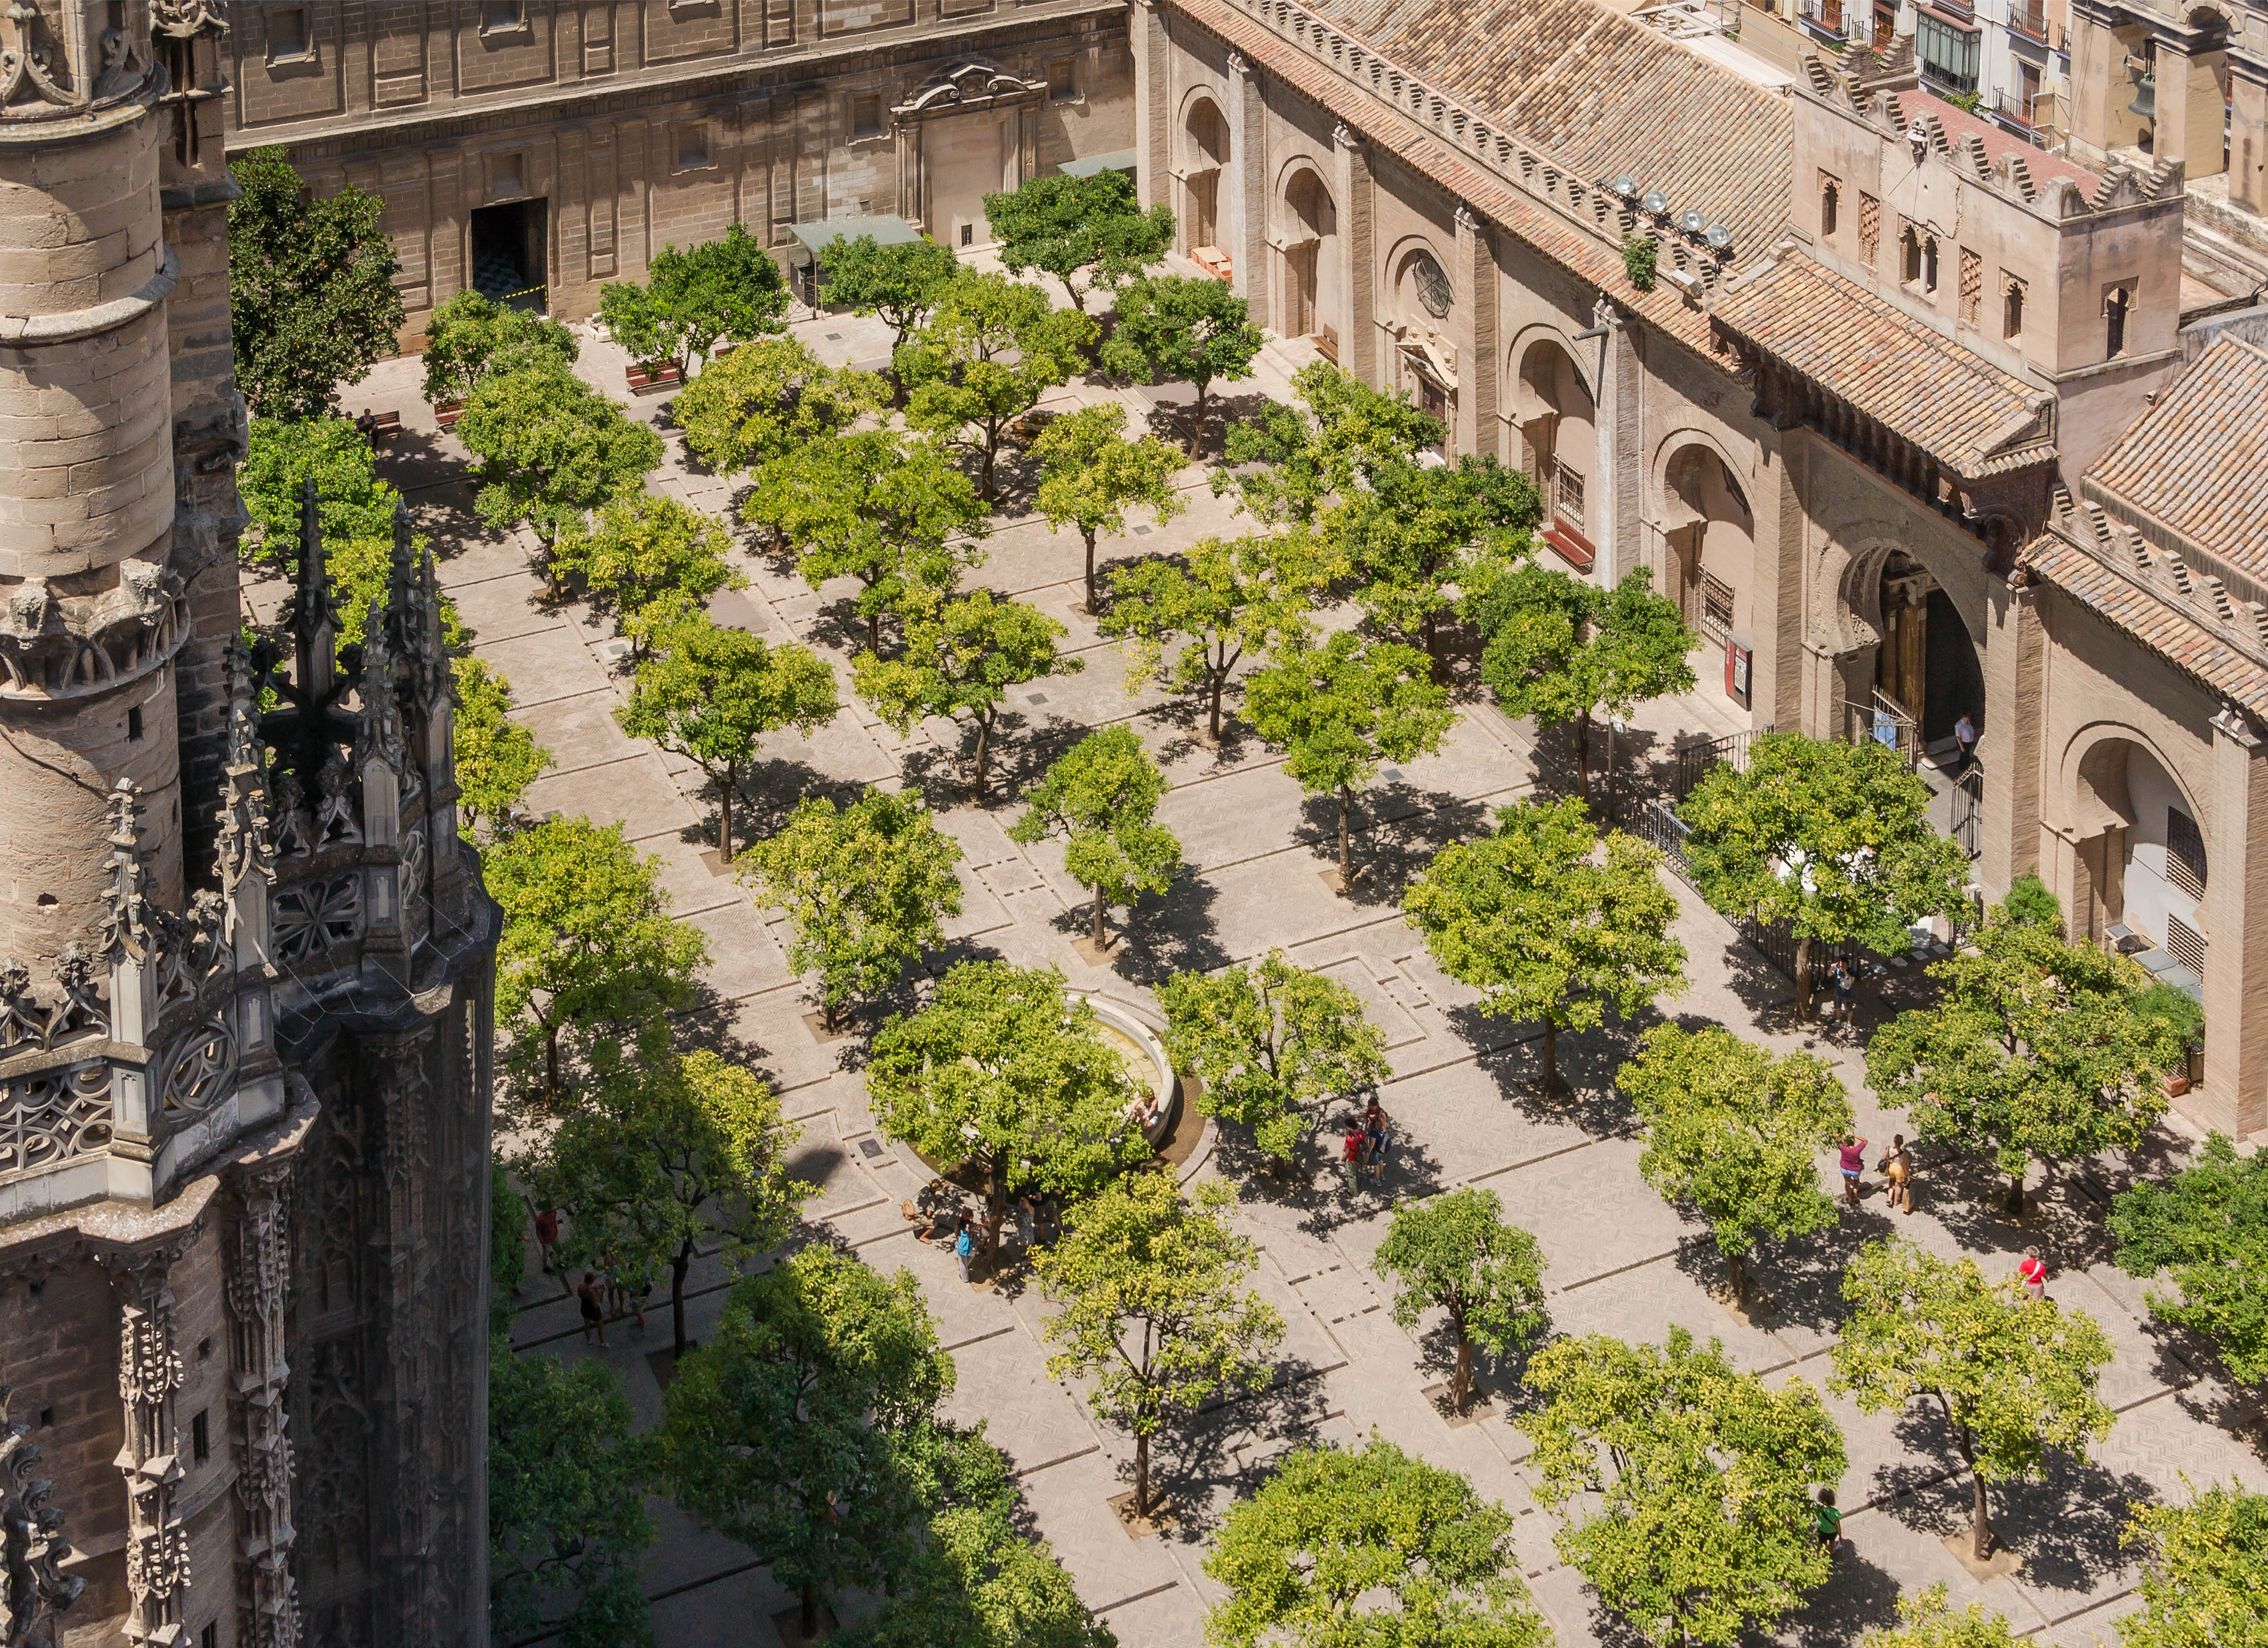 Orange trees courtyard cathedral from Giralda Seville Spain